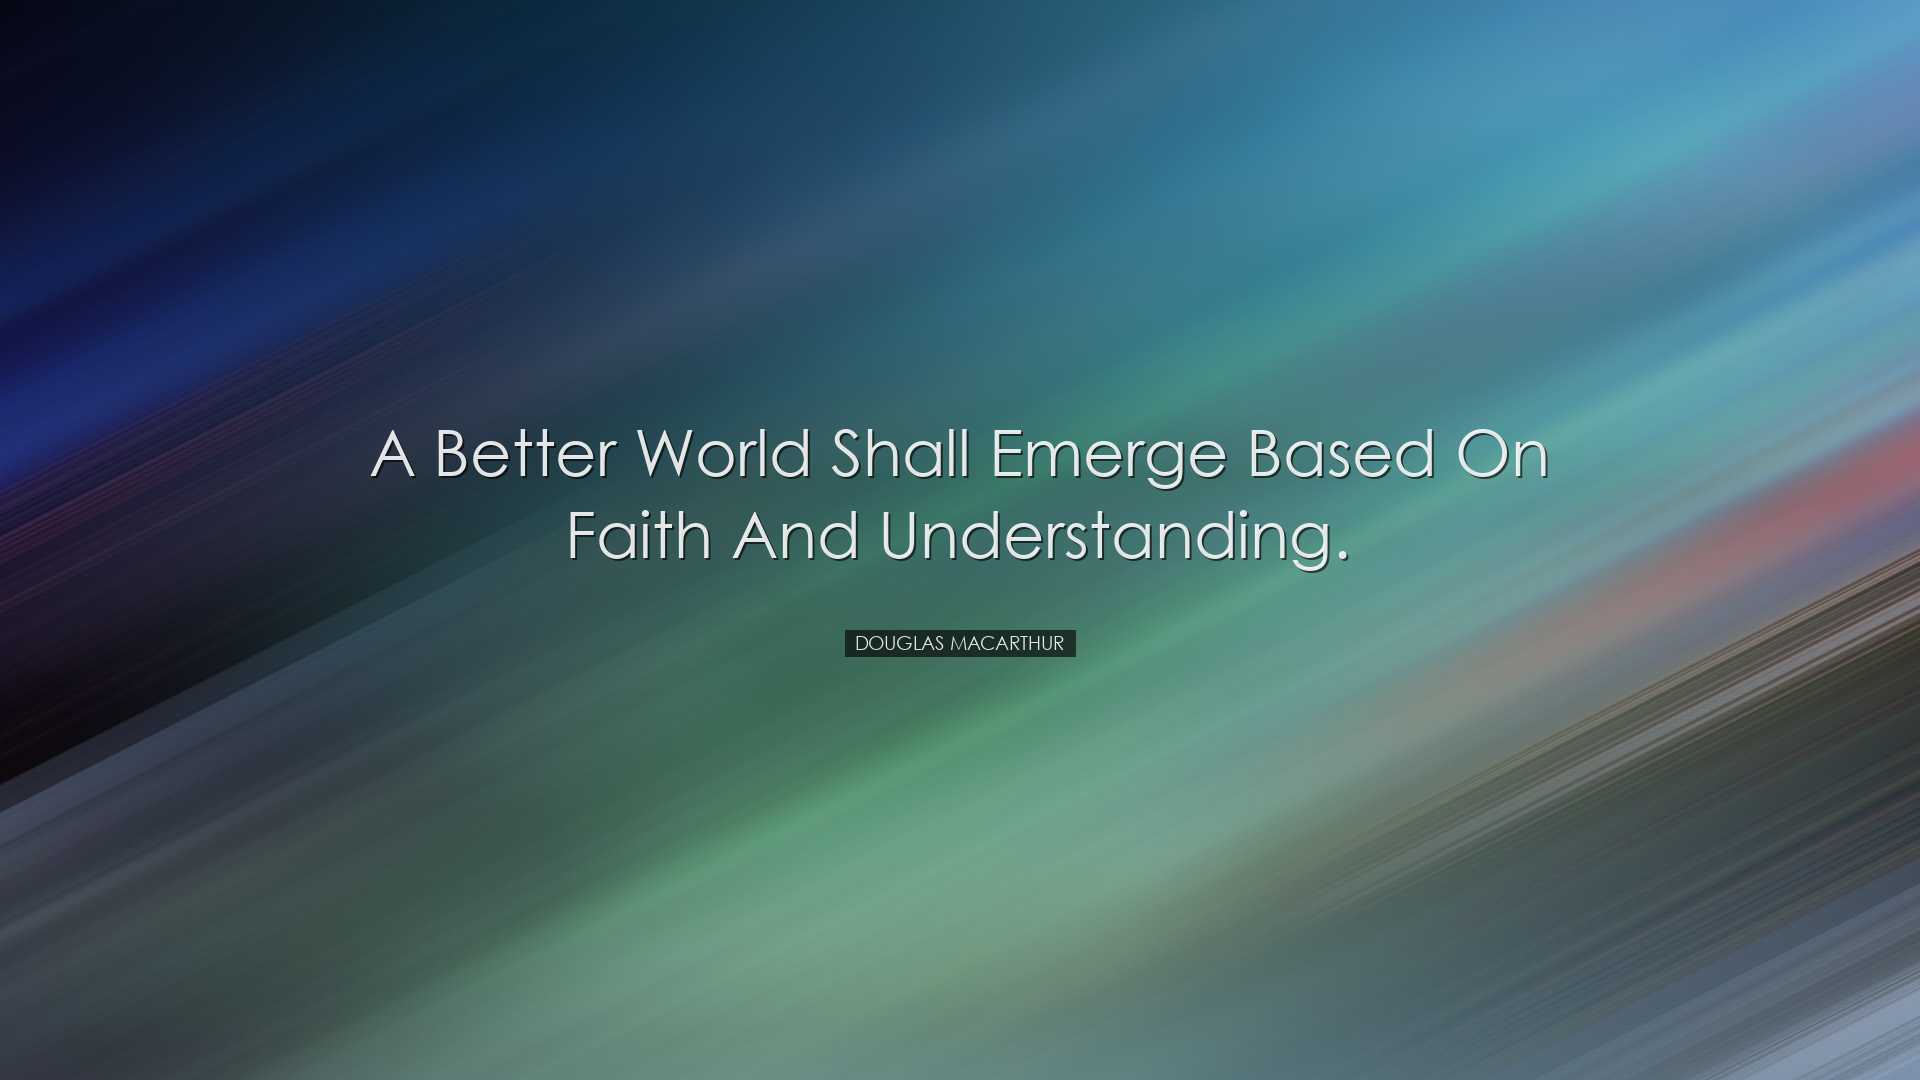 A better world shall emerge based on faith and understanding. - Do